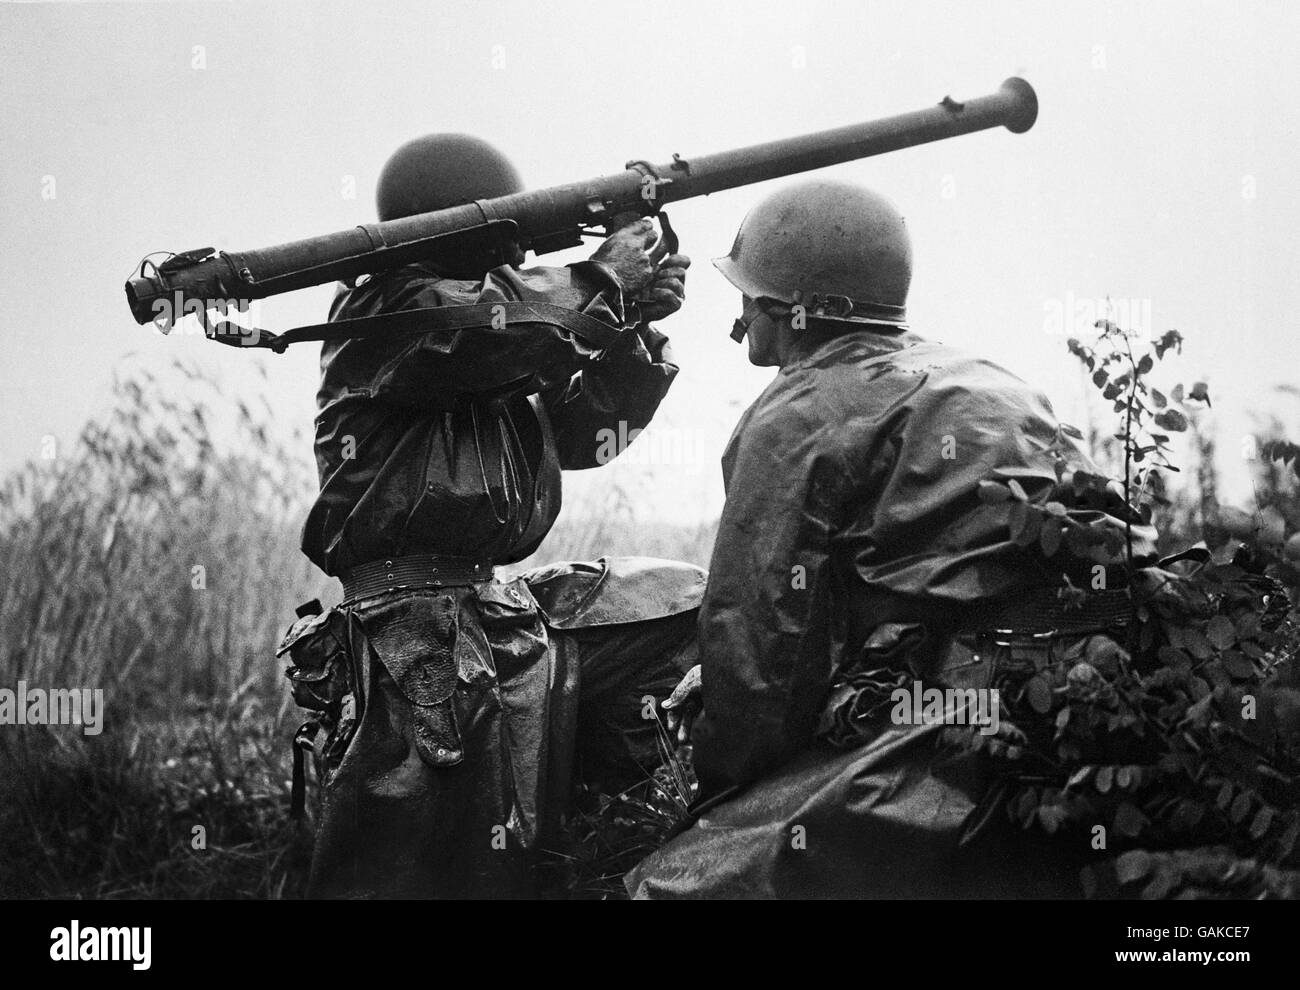 This two man bazooka team prepares to fire at tanks of the North Korean army, near the front lines of the battle by American and south Korean troops against the red invaders from the North. Stock Photo